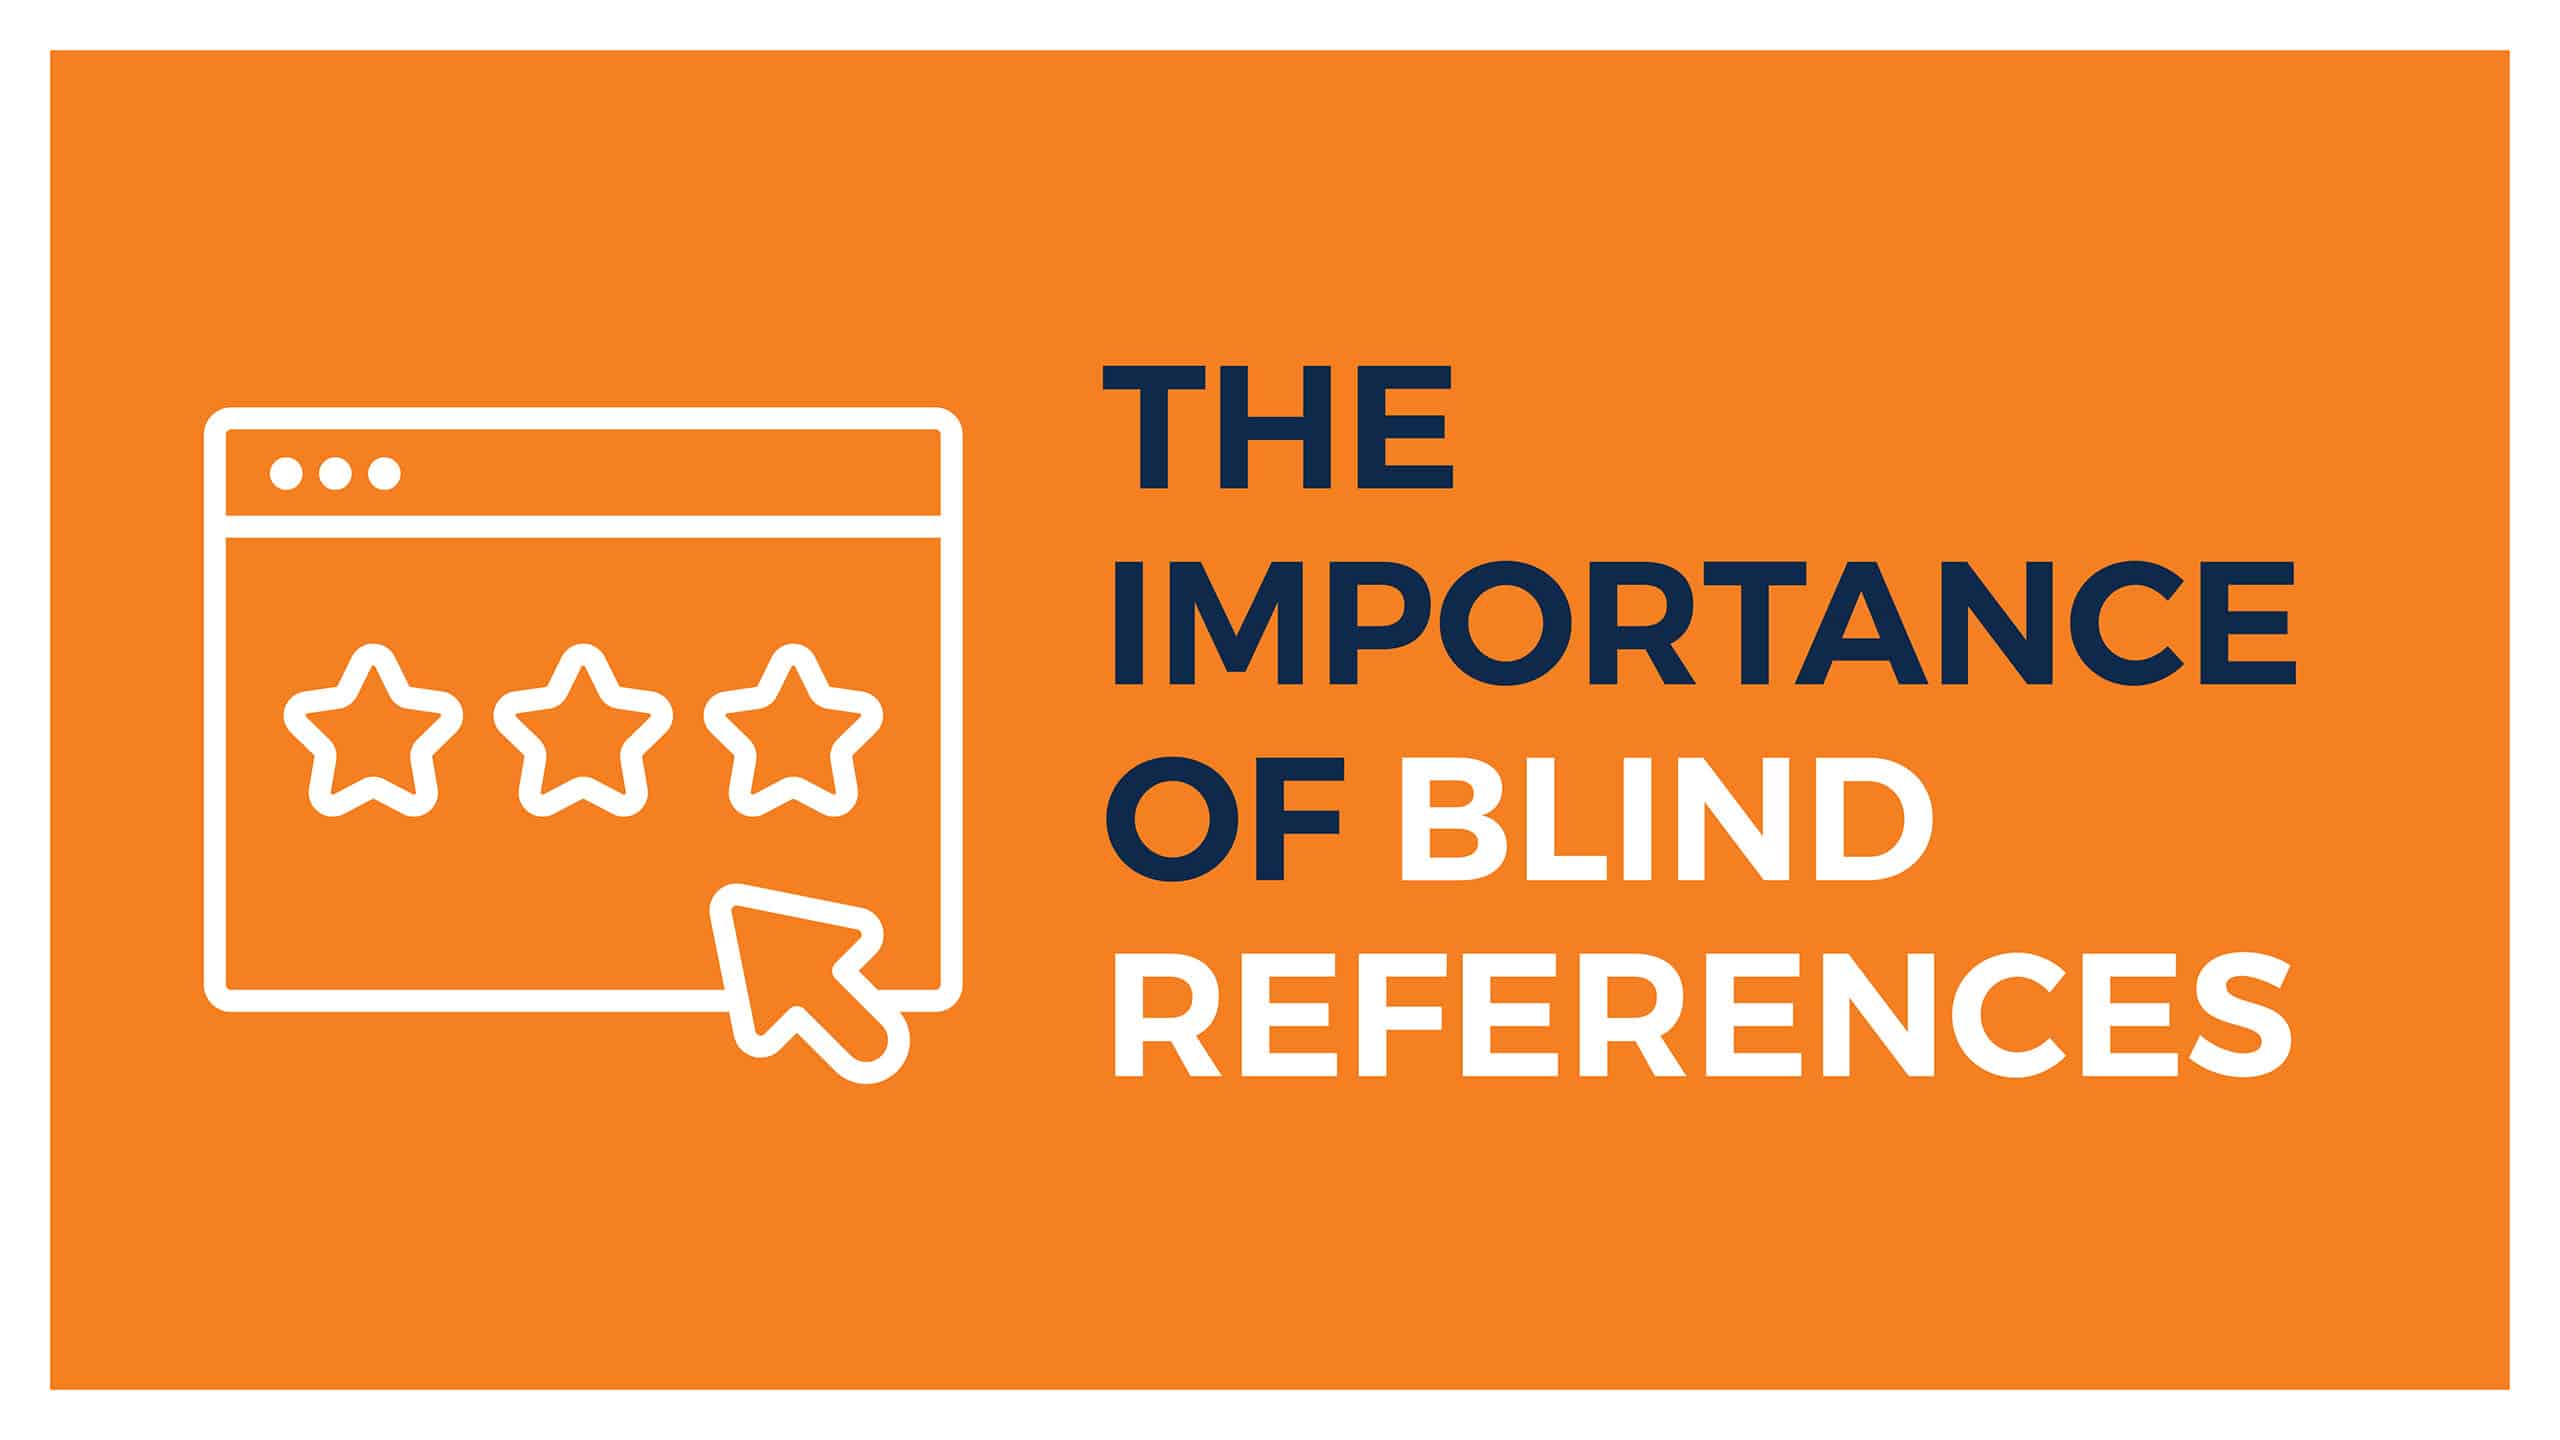 The Importance of Blind References